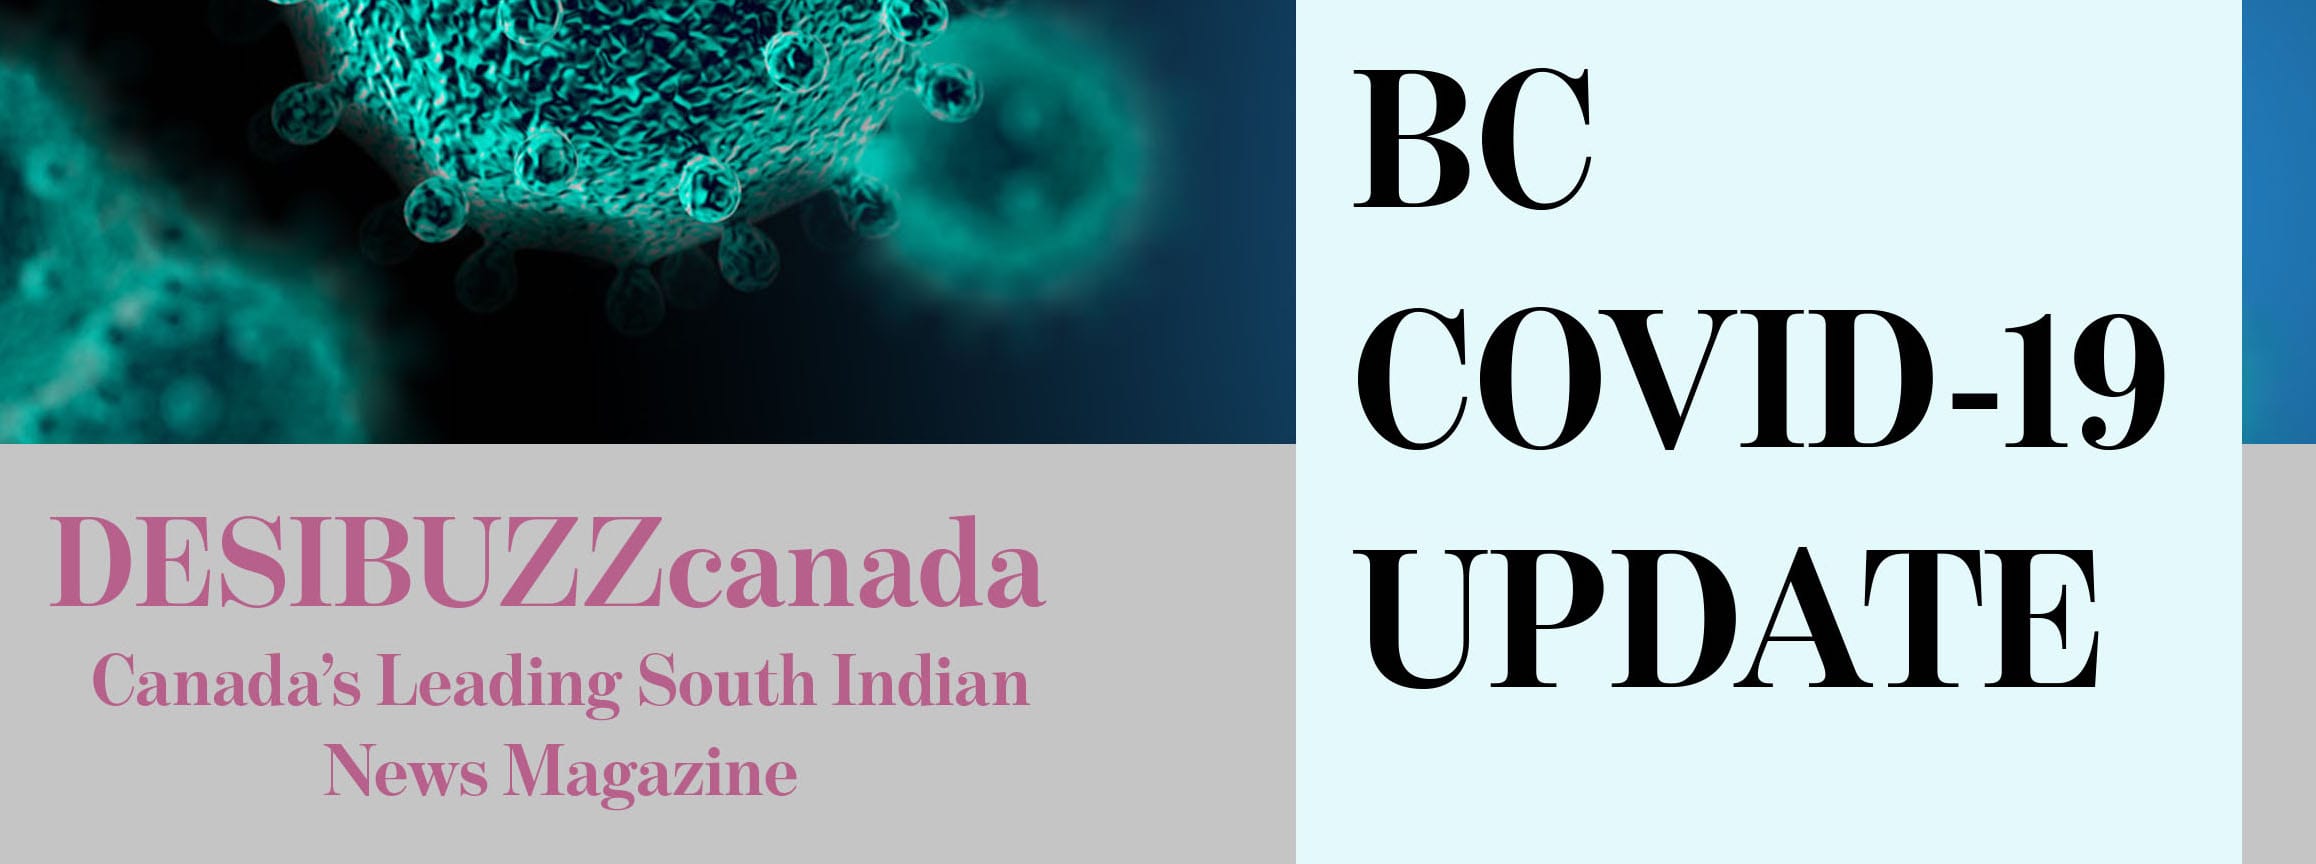 BC COVID-19 DAILY UPDATE: Cases Continue To Decline As BC Announces Restart Plan